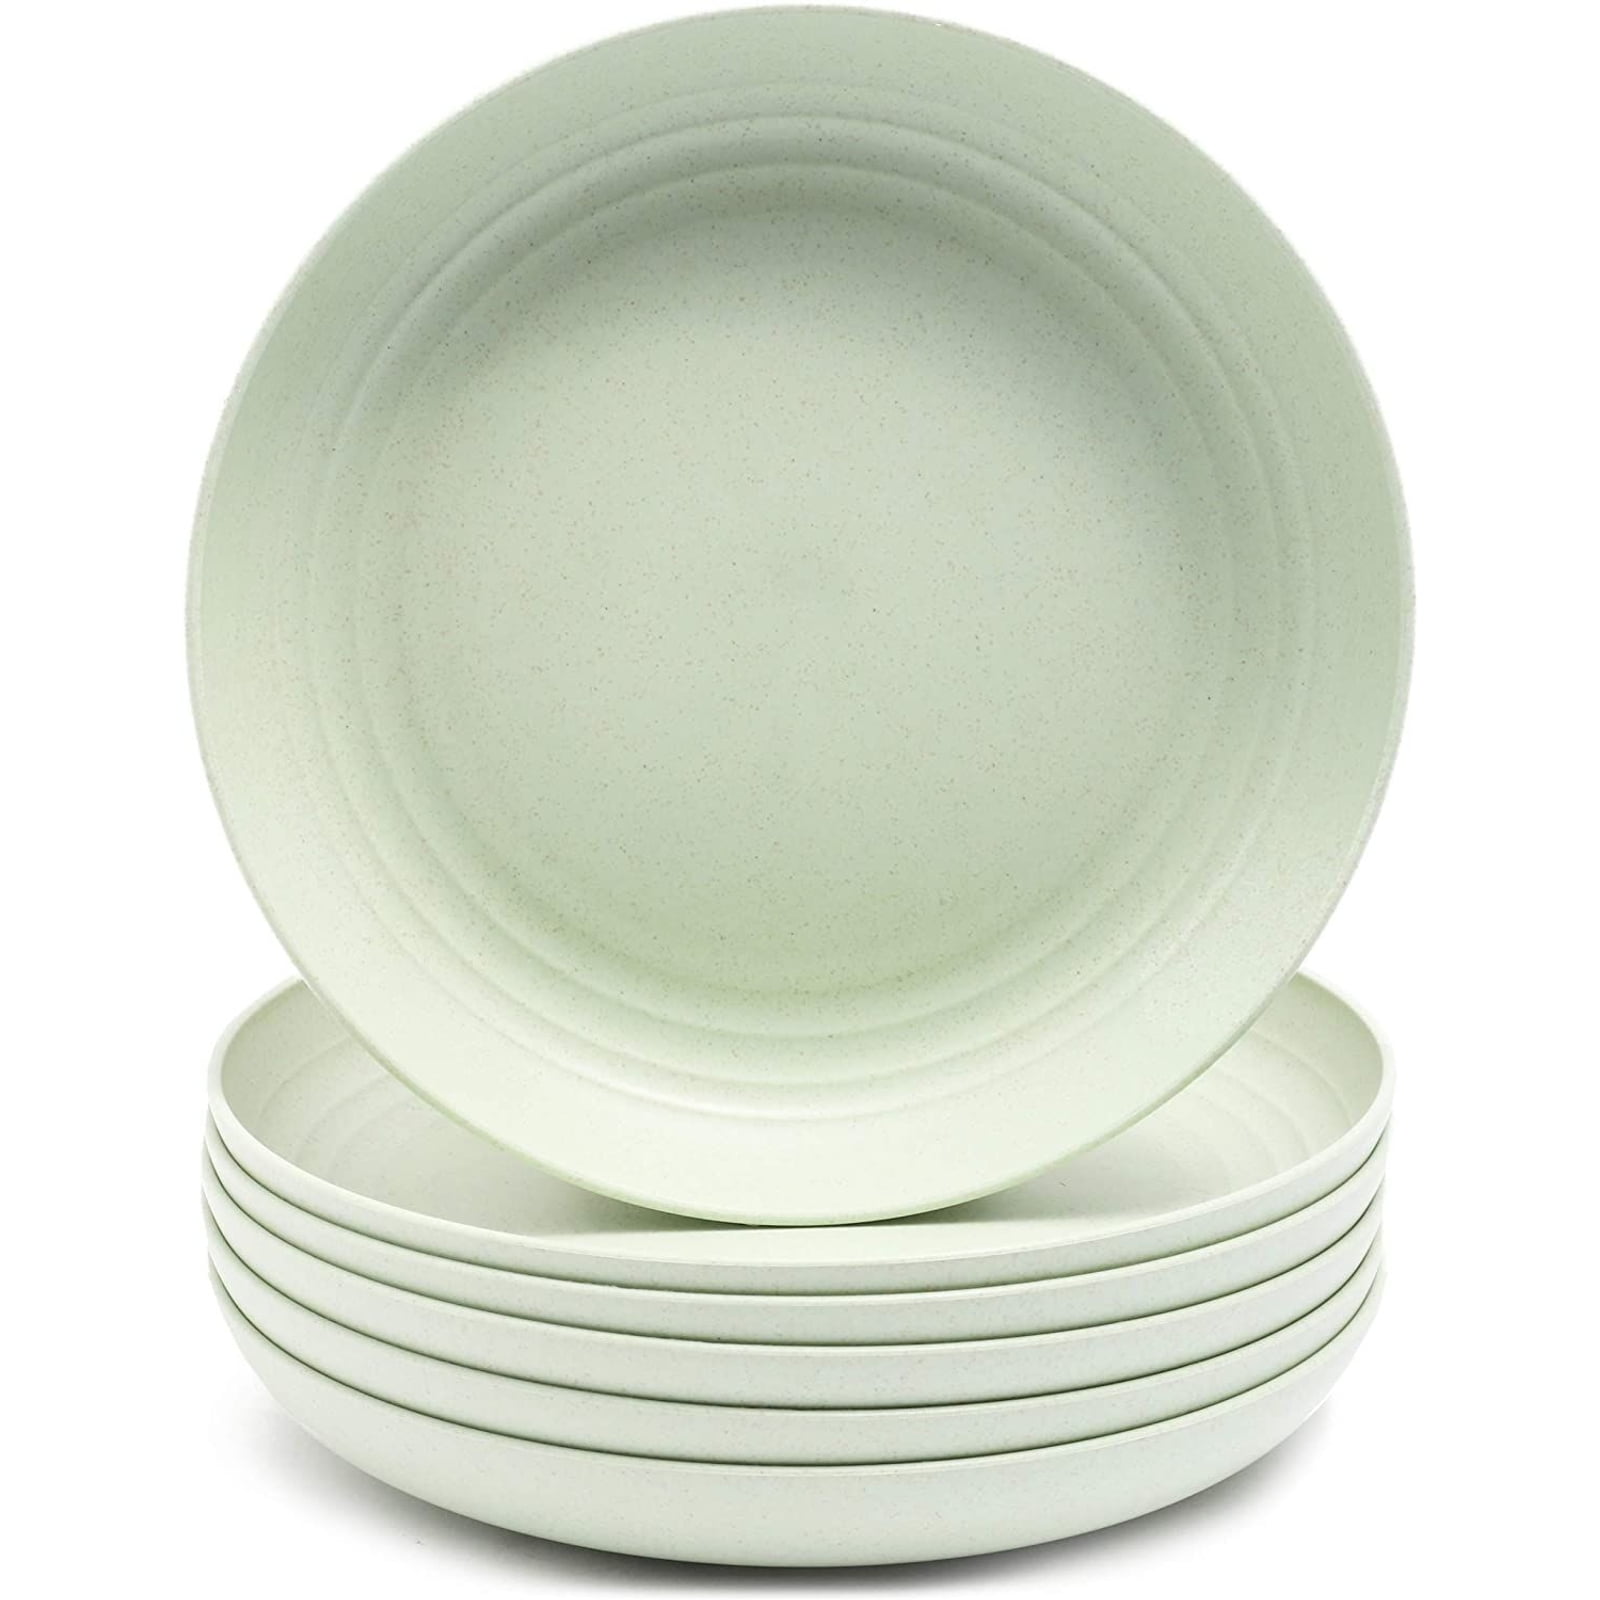 PACK OF 15 GREEN PAPER PLATES 9" ROUND DISPOSABLE FOR PARTY BIRTHDAY TABLEWARE